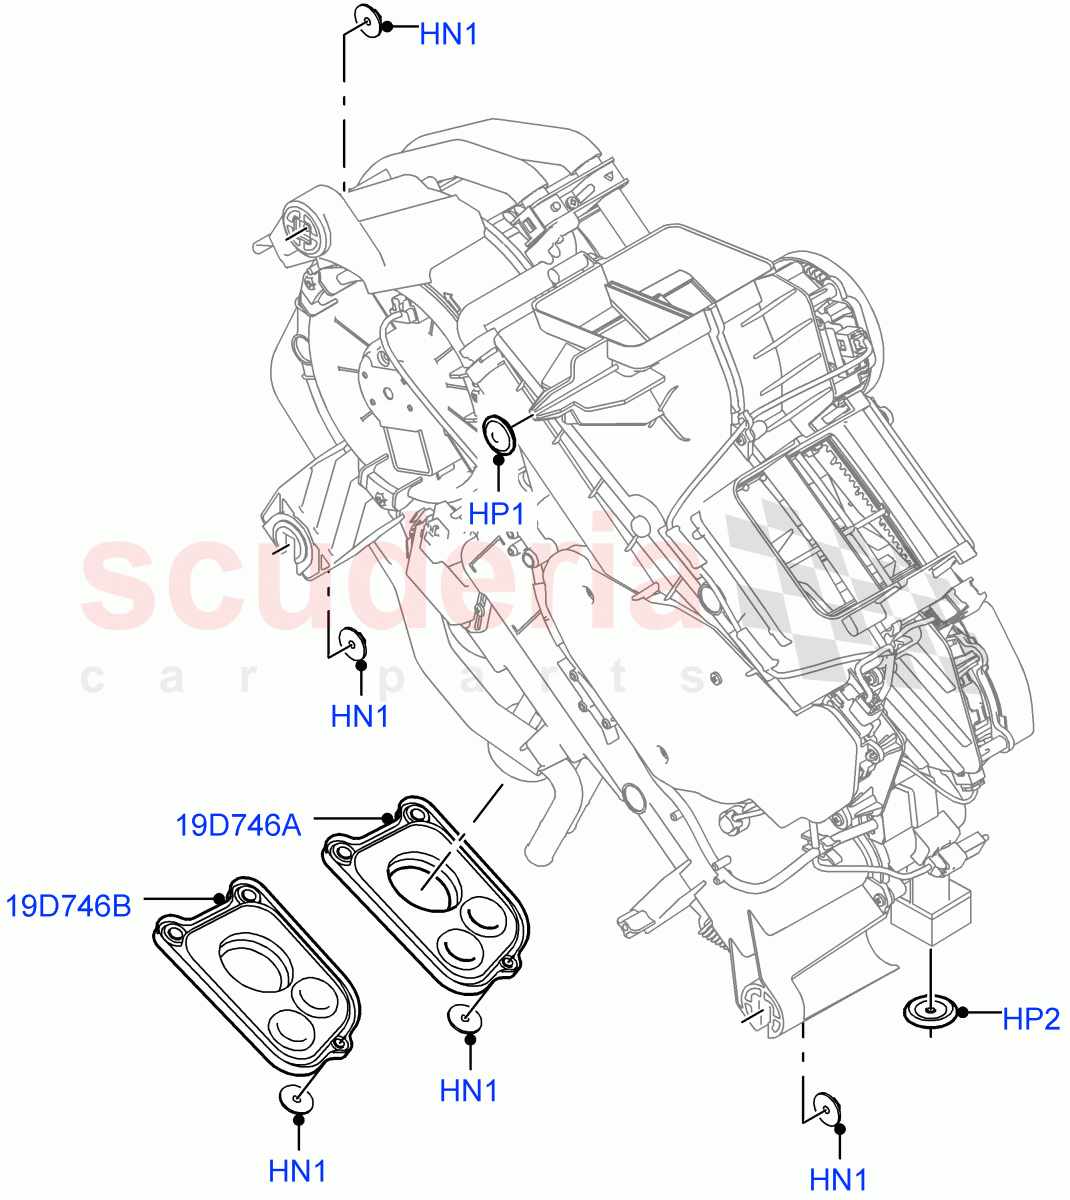 Heater/Air Cond.External Components(Solihull Plant Build, Auxiliary Unit)((V)FROMHA000001) of Land Rover Land Rover Discovery 5 (2017+) [2.0 Turbo Diesel]